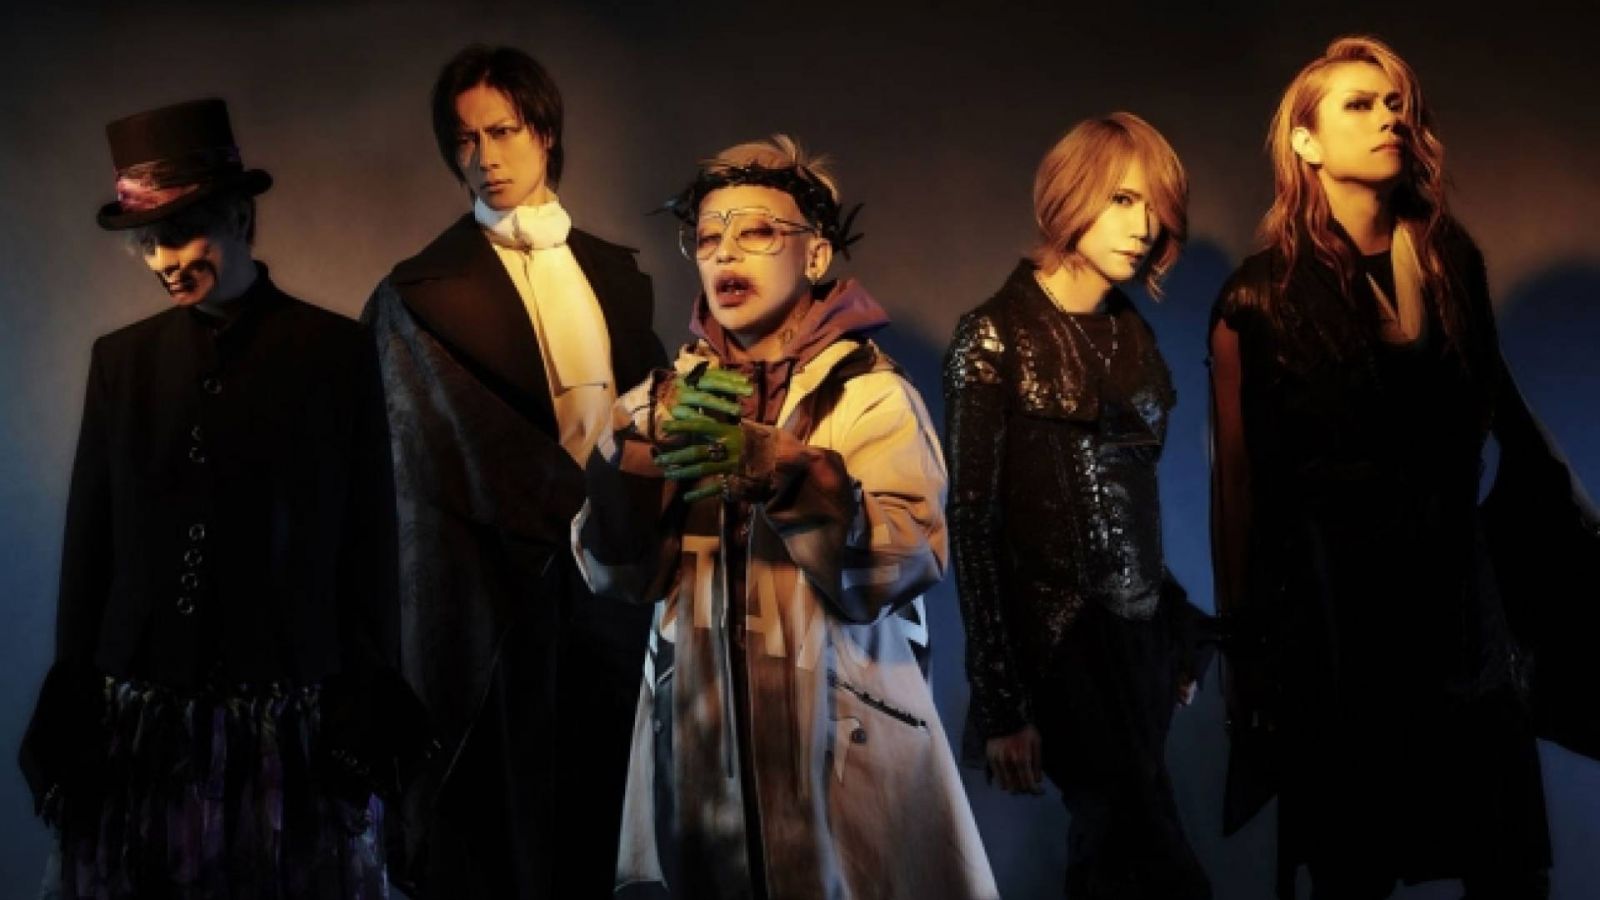 DIR EN GREY to Release New Album "The Insulated World" © sun-krad Co., Ltd. All rights reserved.